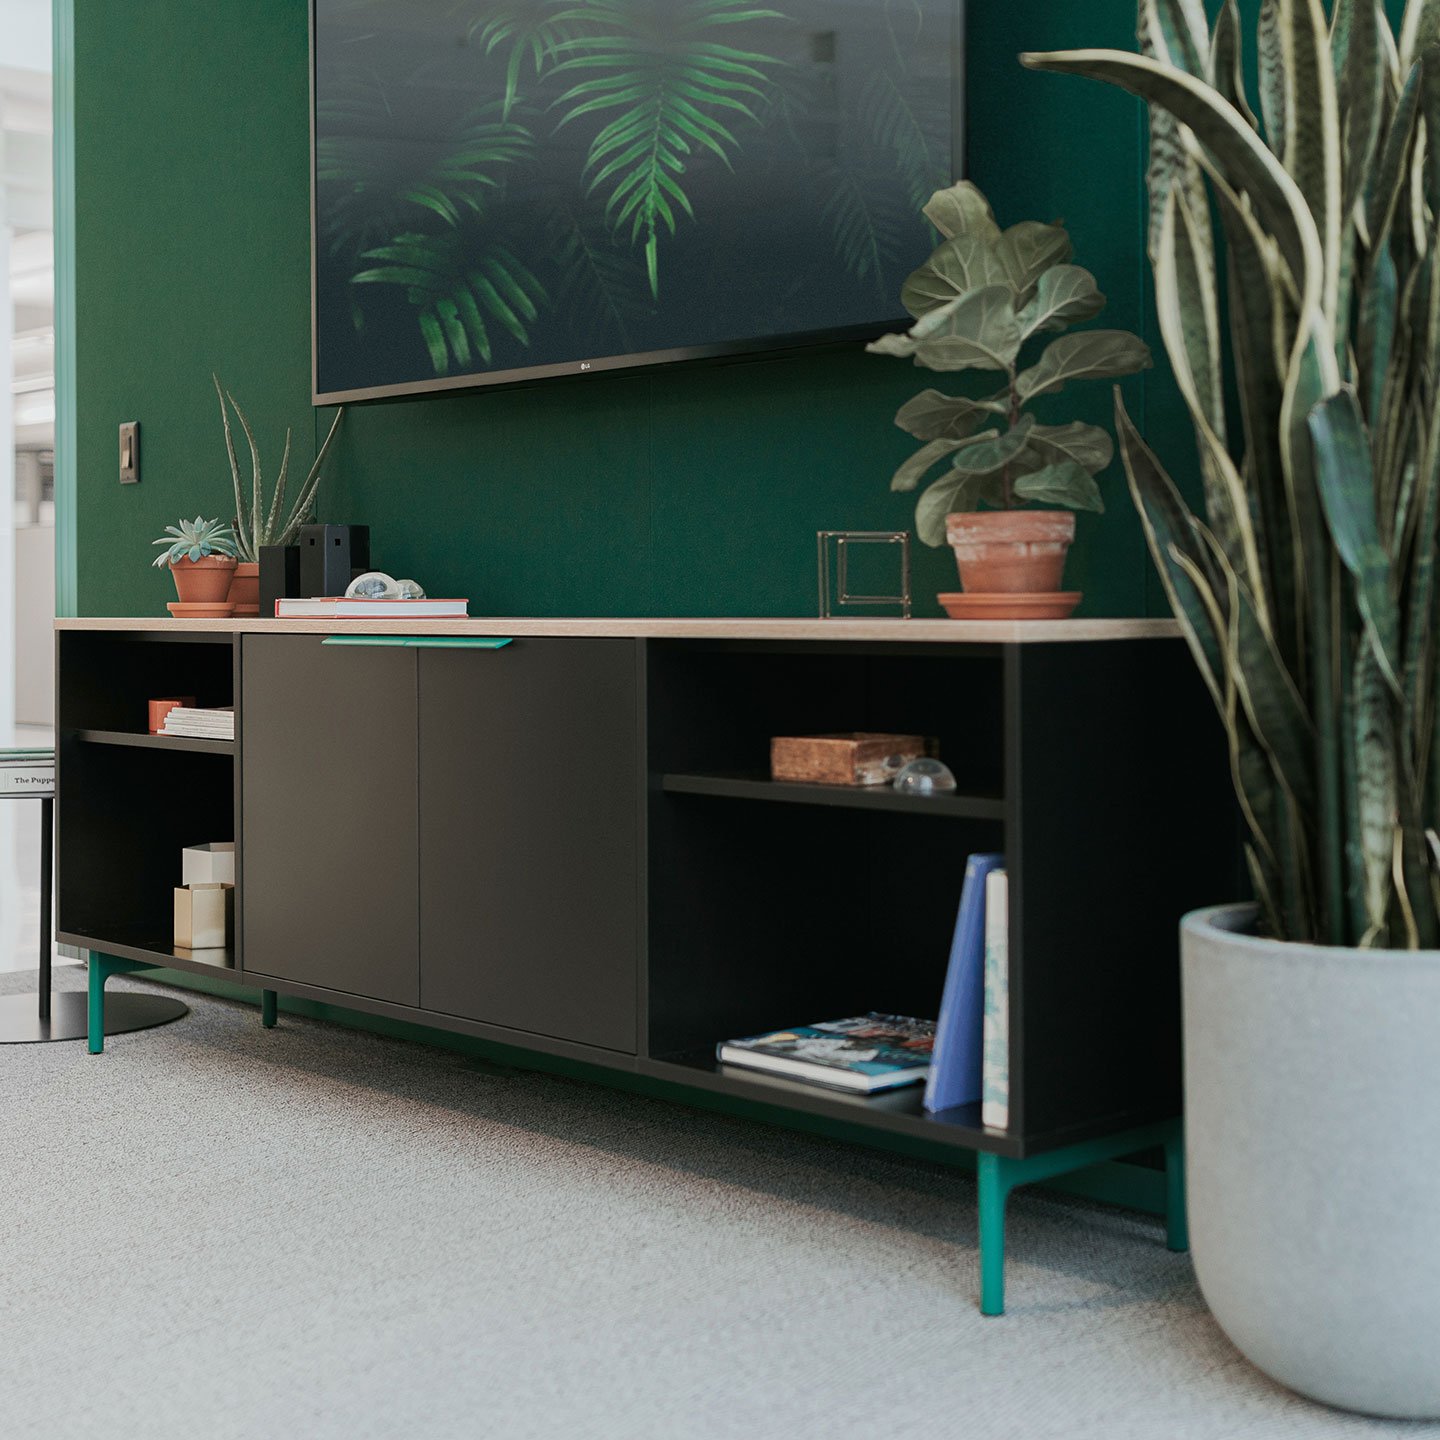 Be_Hold storage credenza in black and green legs with open shelves and hinge doors.